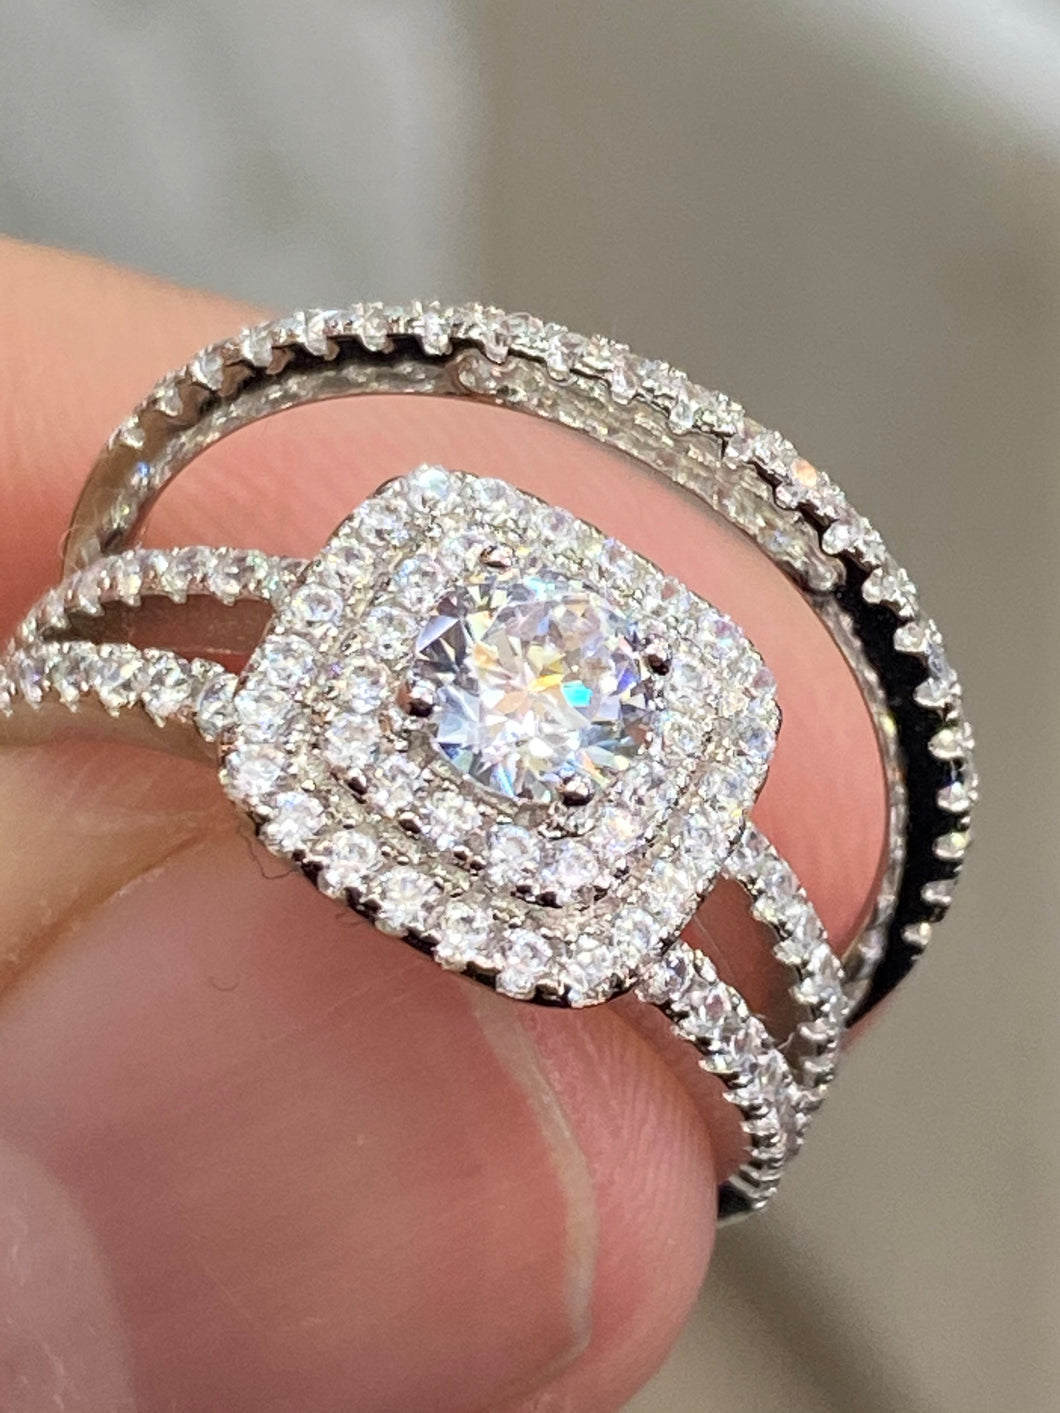 Provident Jewelry - 7+ carats of pure luxury 💎 This gorgeous round  brilliant cut offers major sparkle in a classic platinum mounting. Discover  more diamond engagement rings at #ProvidentJewelry. | Facebook